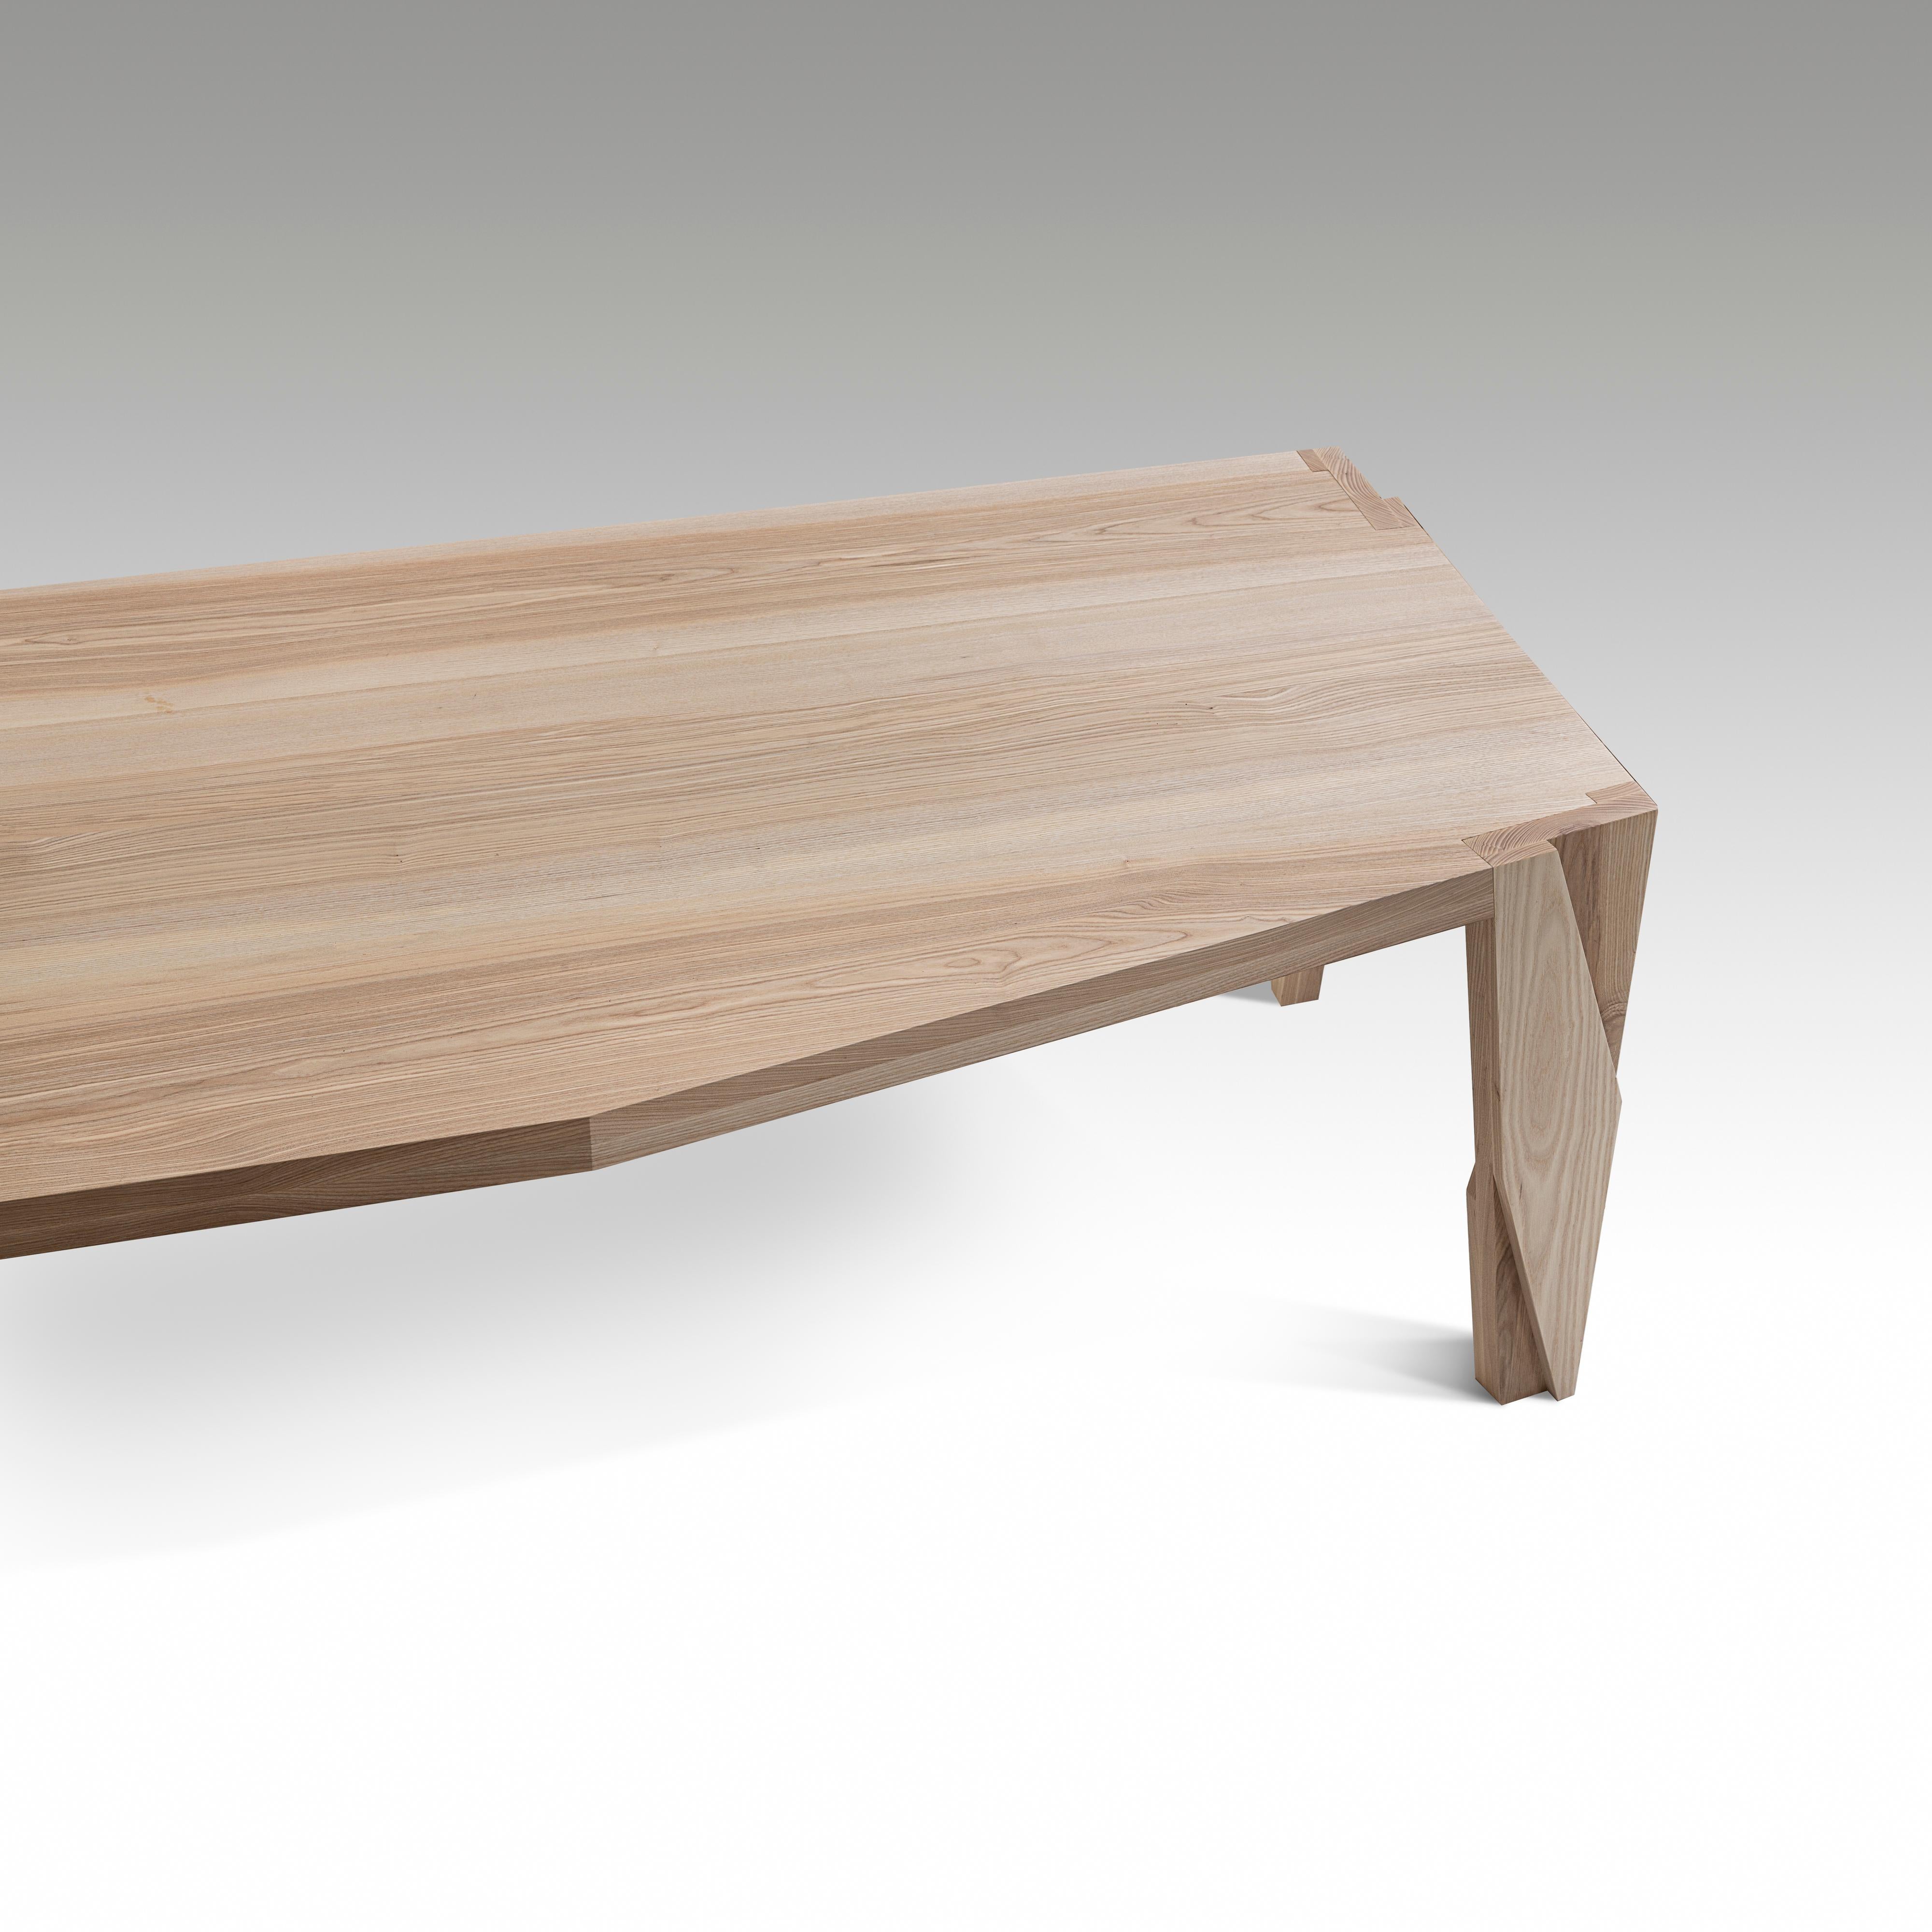 Portuguese Contemporary Wooden 6 Seater Dining Table, Moramour by Adam Court for Okha For Sale